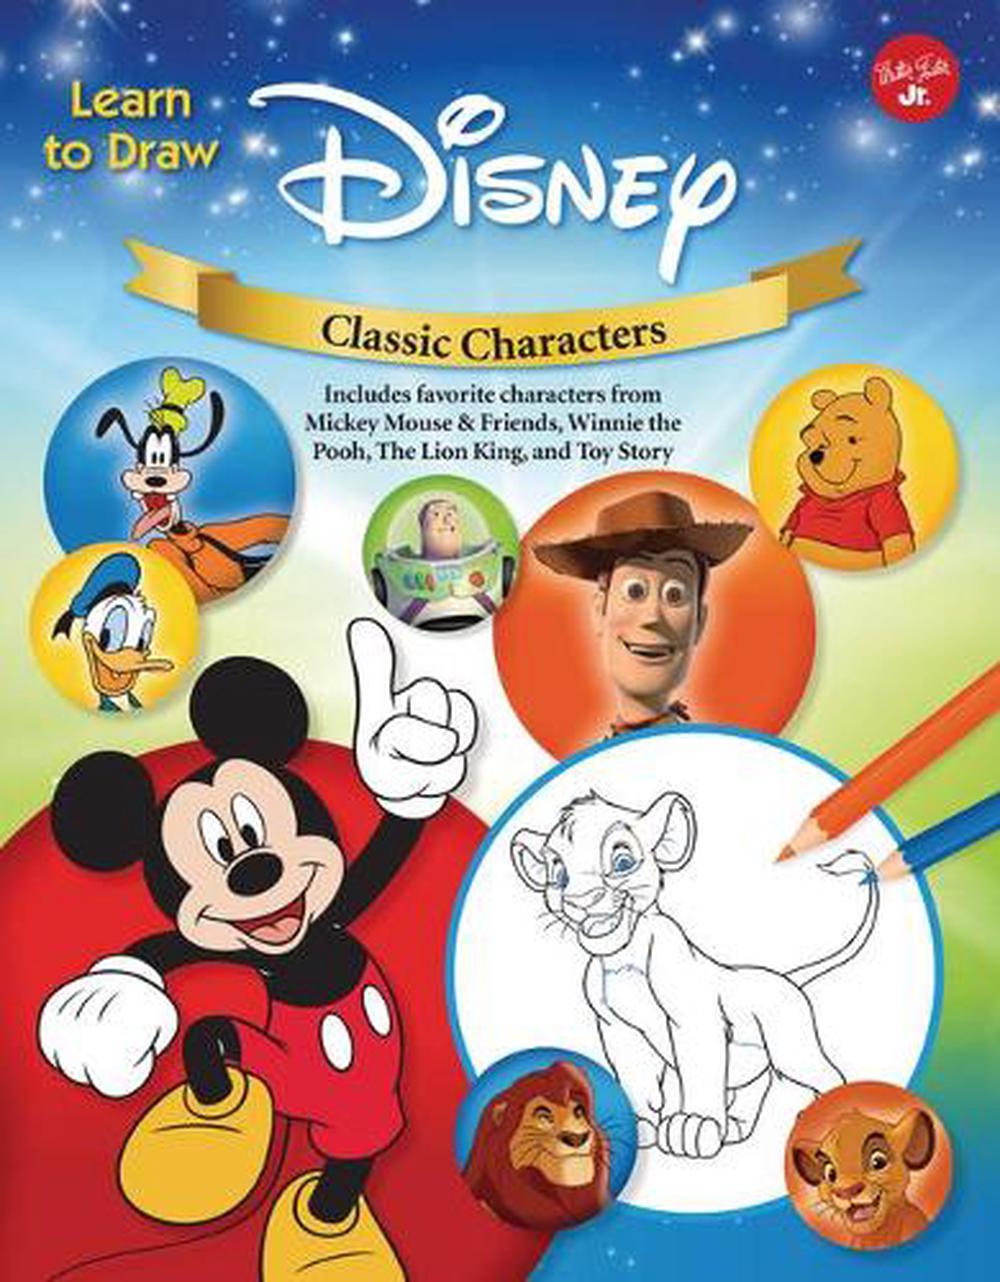 Learn to Draw Disney Classic Characters Learn to Draw Characters from